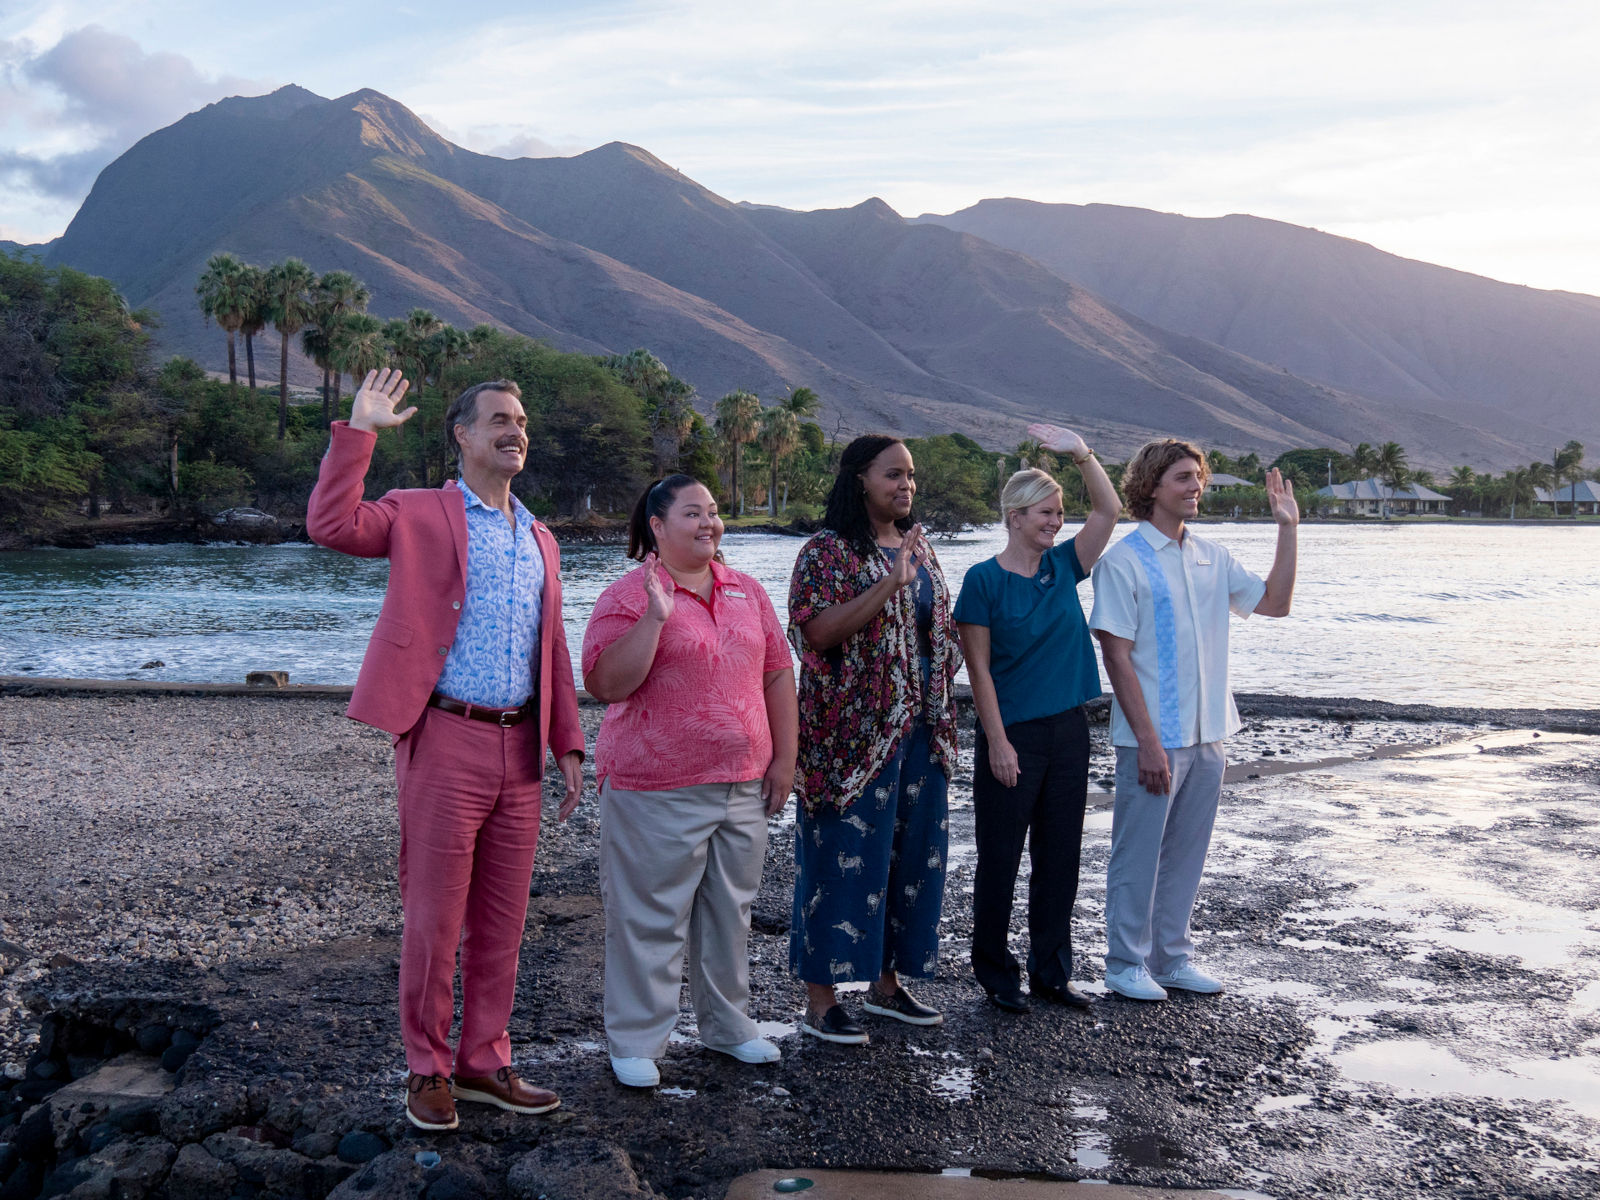 Murray Bartlett, Jolene Purdy, Natasha Rothwell, and Lukas Gage in 'The White Lotus' premiere, which is paralleled in the finale. They're standing on the beach and waving.